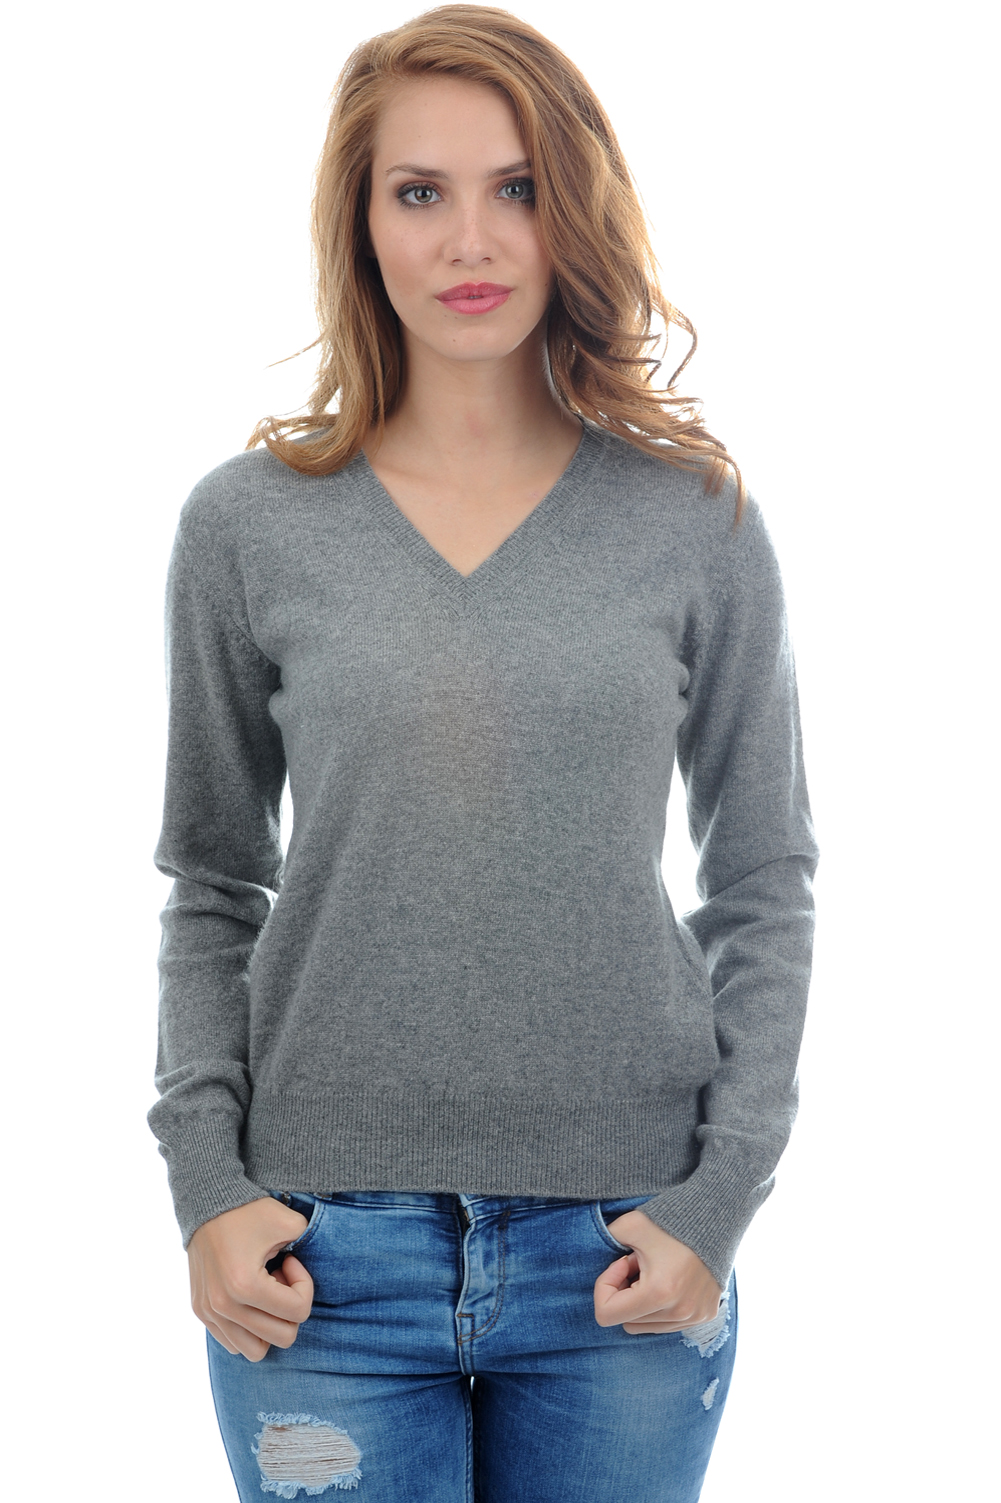 Cachemire pull femme col v faustine gris chine 3xl